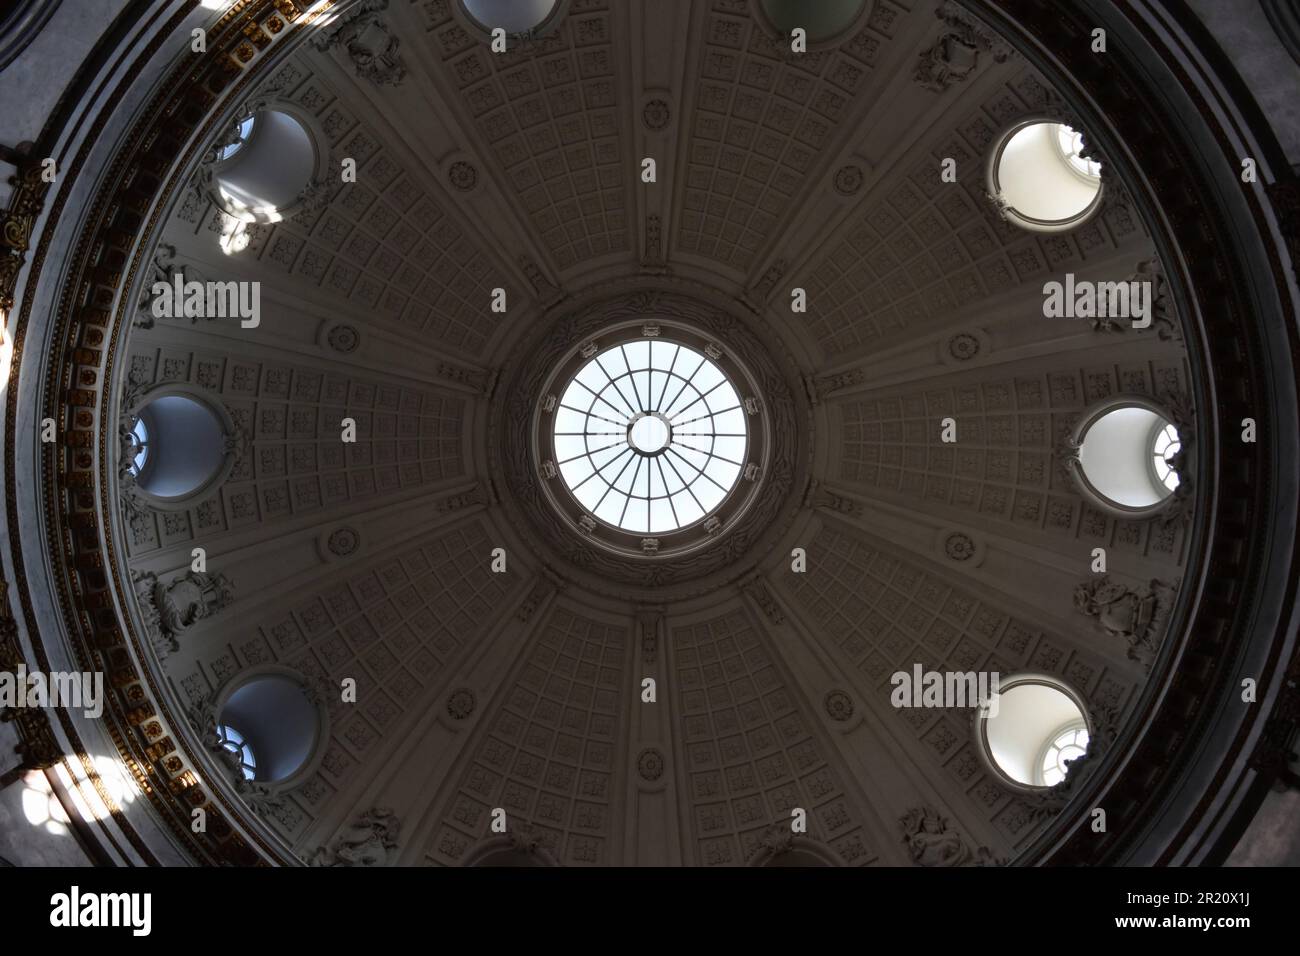 The grand domed ceiling of the Berlin Palace. Stock Photo